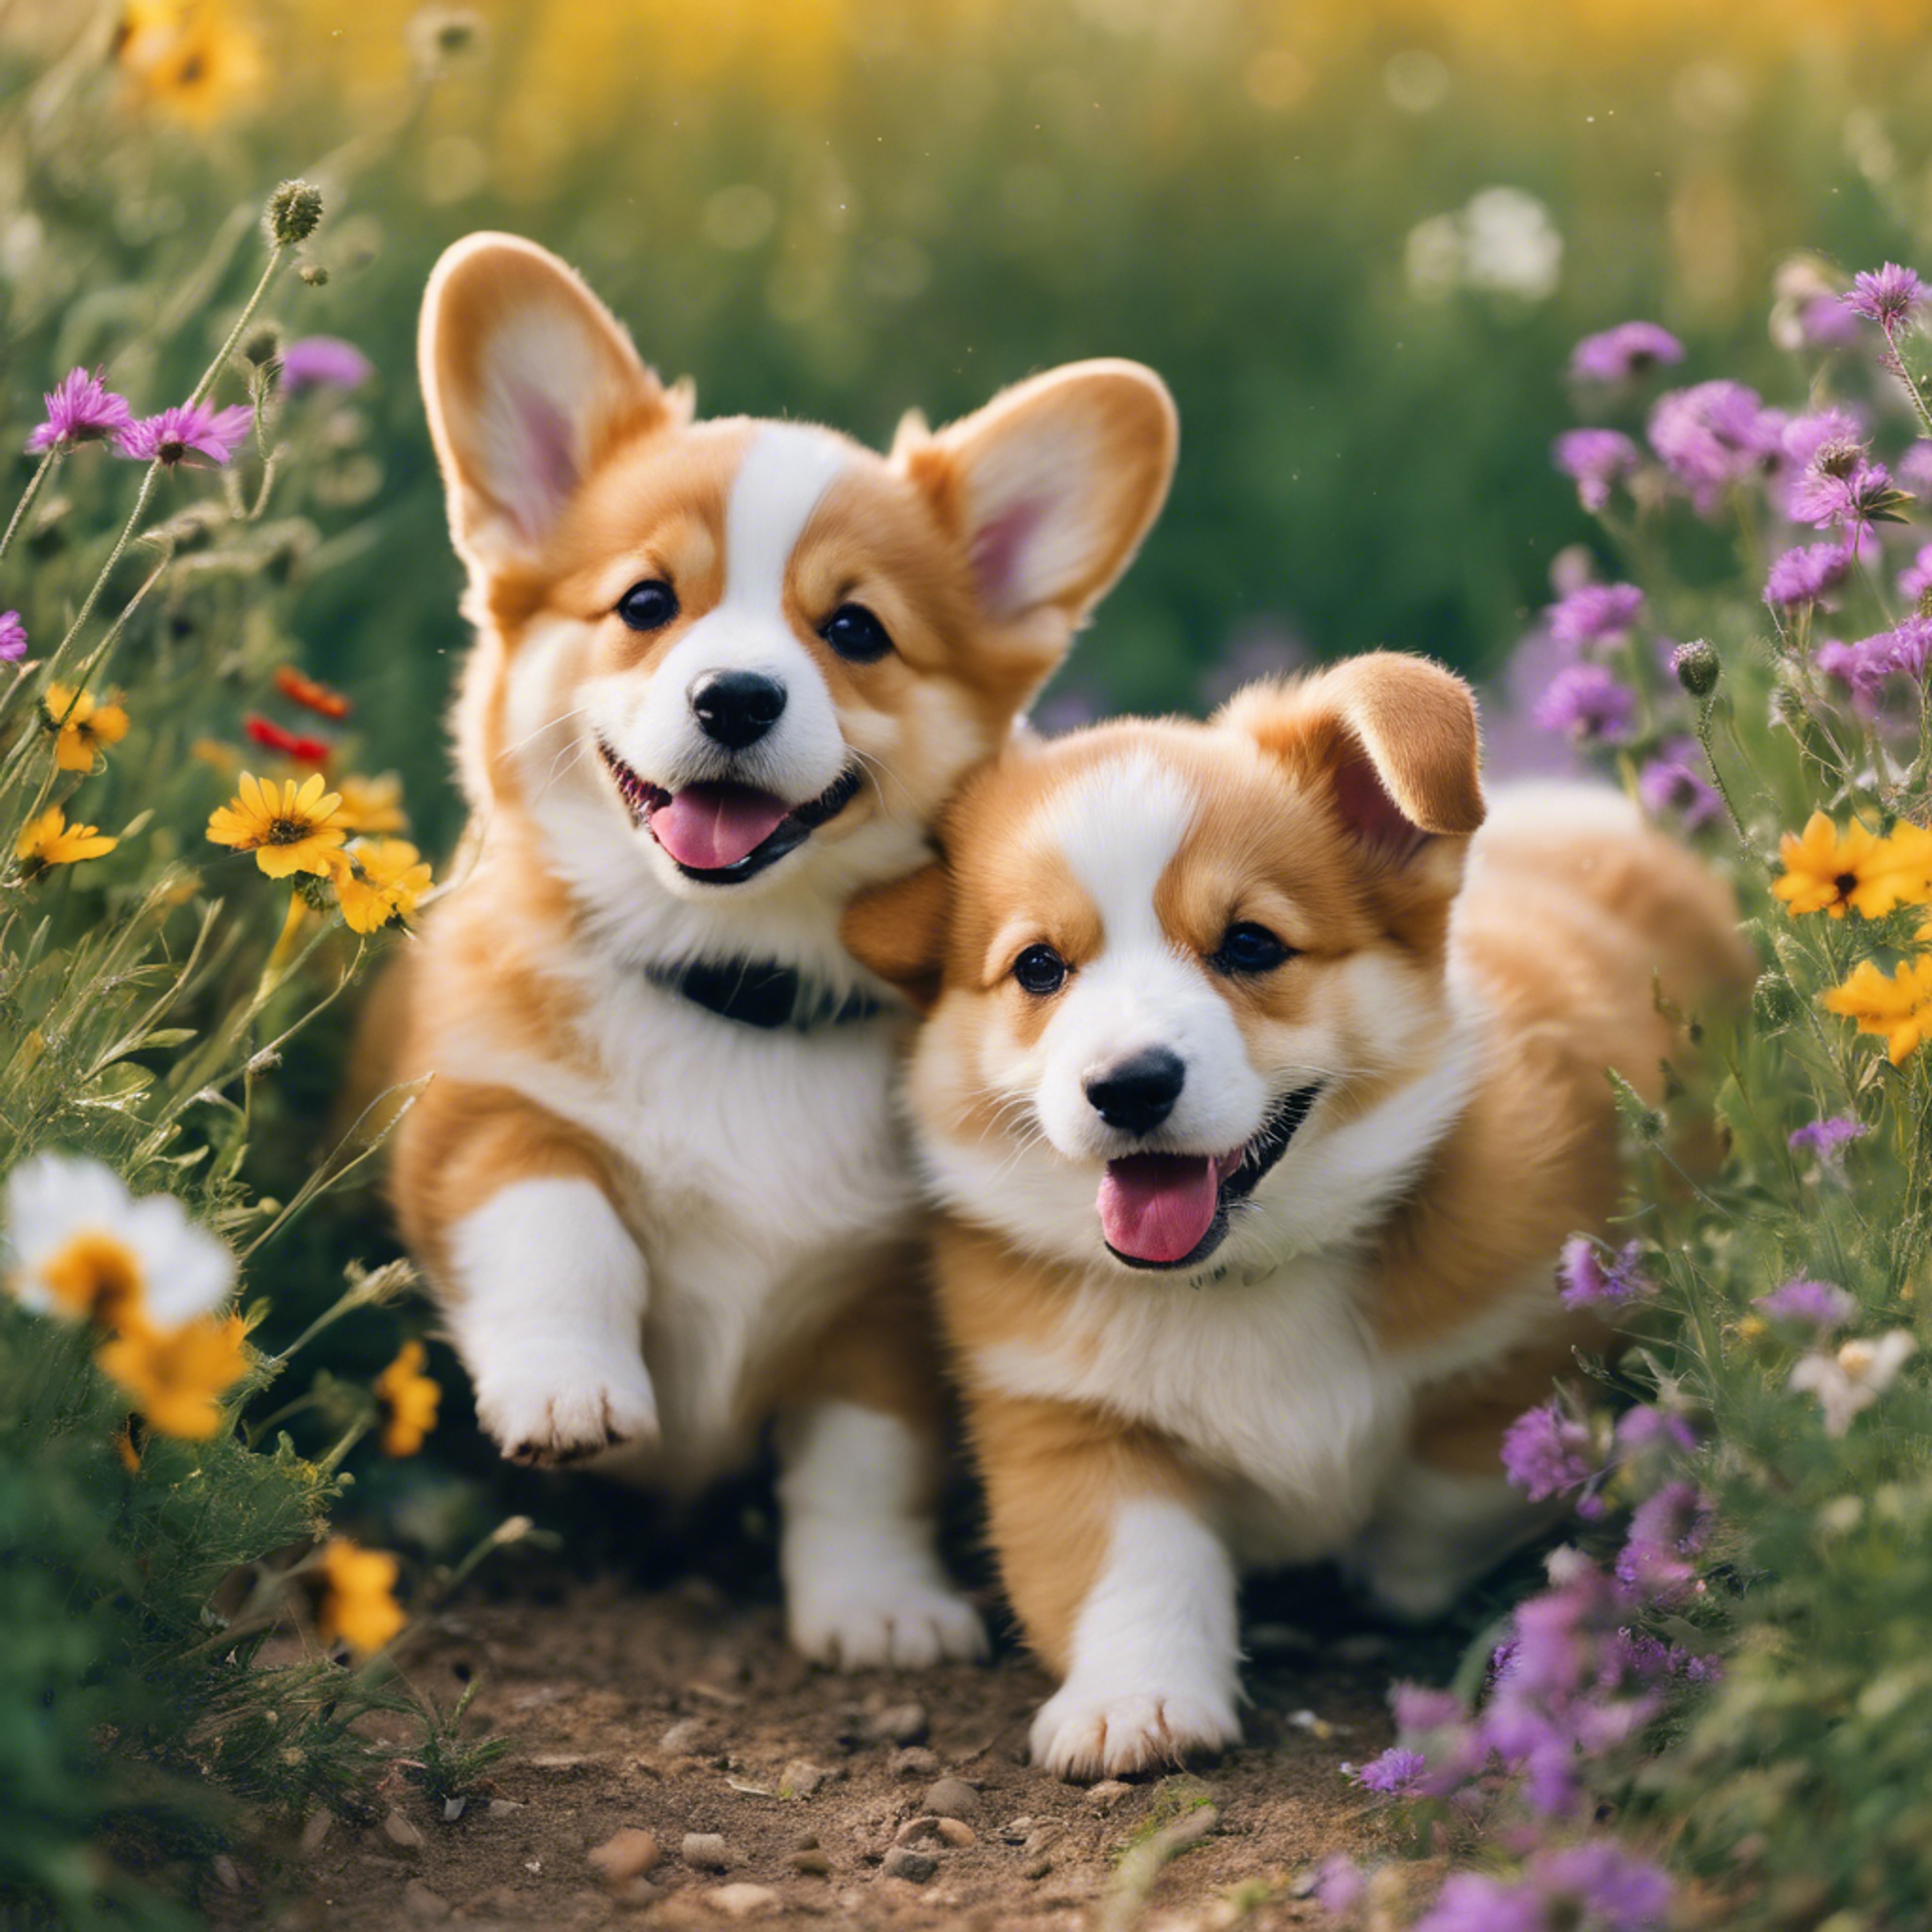 Corgi puppies frolic in a meadow filled with colourful wildflowers. Tapeta[ff39099a16654d489ef7]